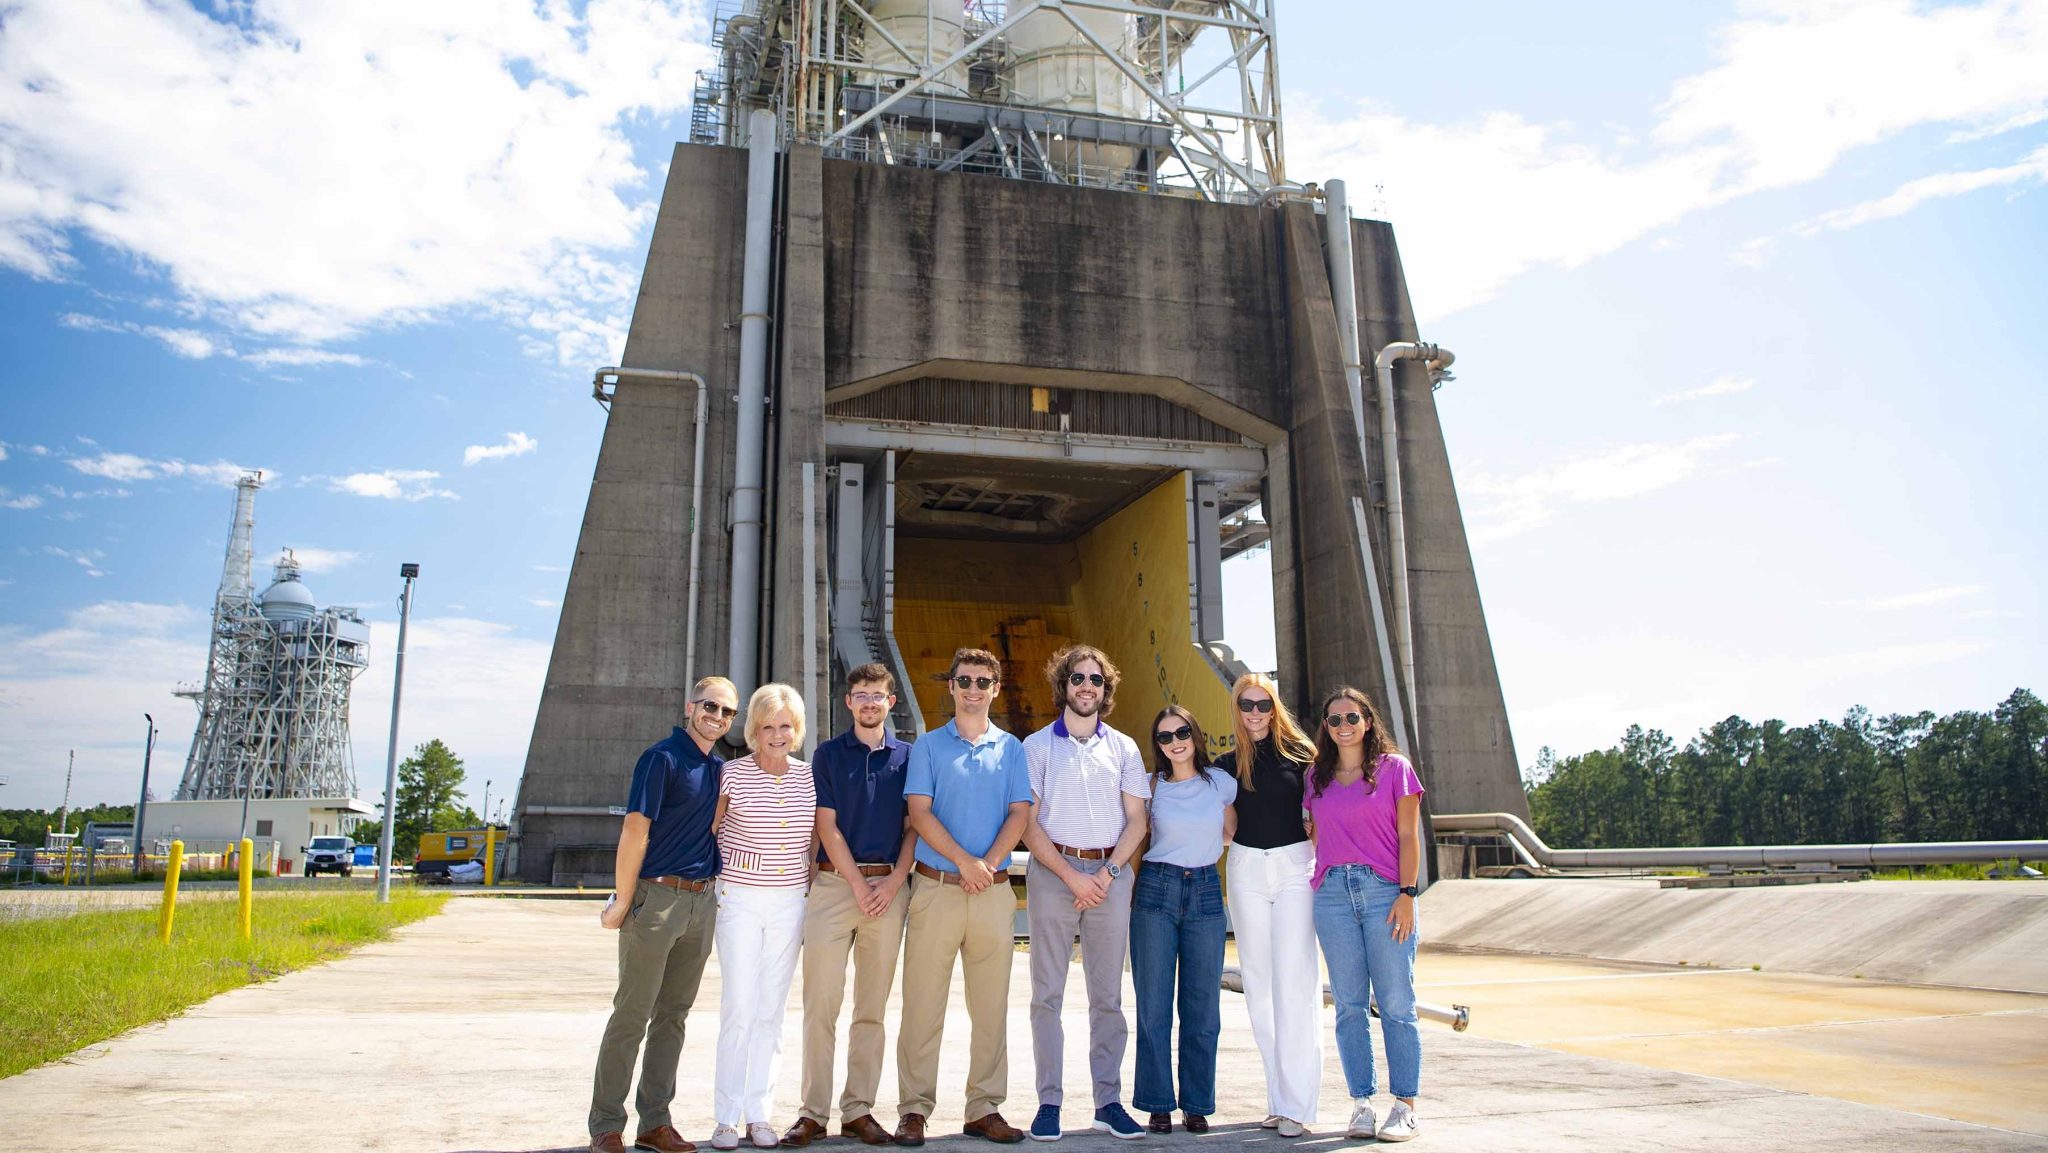 Legislative staff and interns from the office of U.S. Rep. Garrett Graves of Louisiana stand in front of the Fred Haise Test Stand.